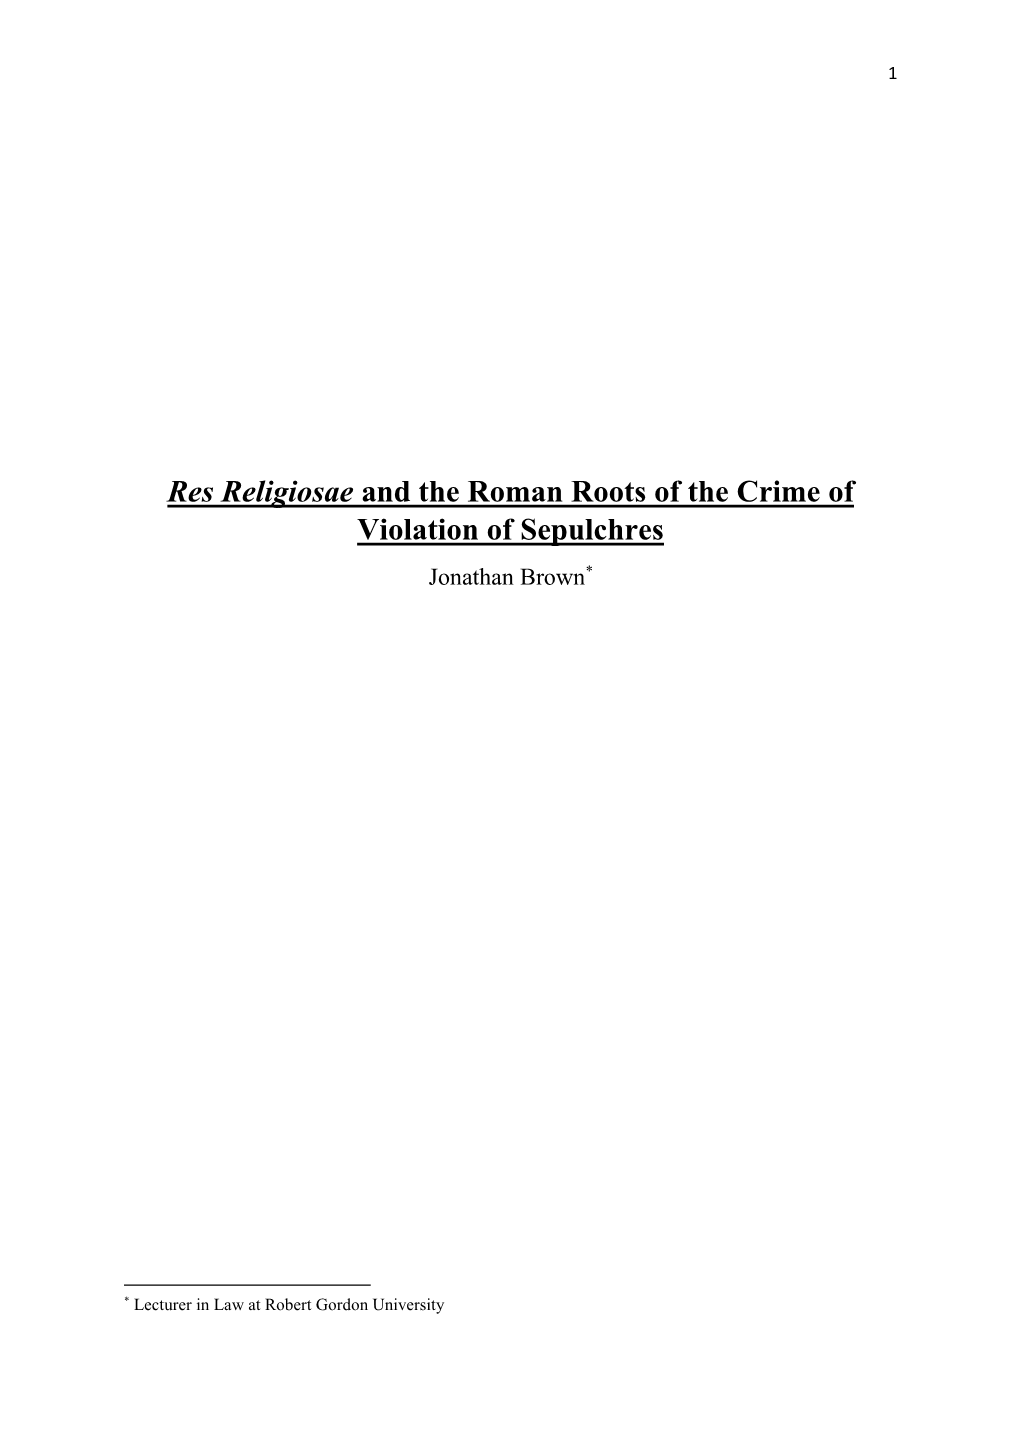 Res Religiosae and the Roman Roots of the Crime of Violation of Sepulchres Jonathan Brown*